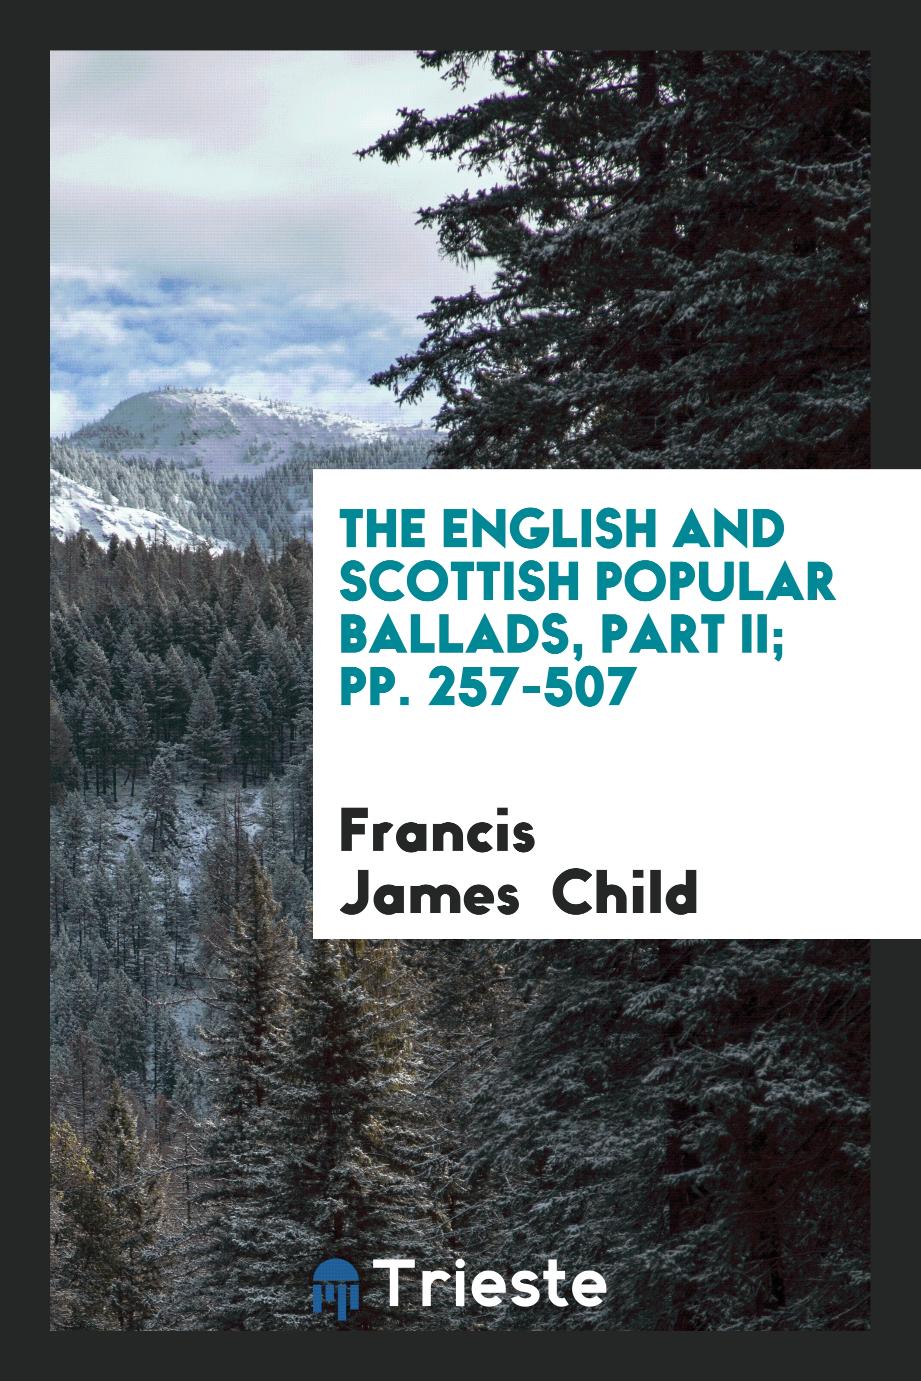 Francis James  Child - The English and Scottish Popular Ballads, Part II; pp. 257-507